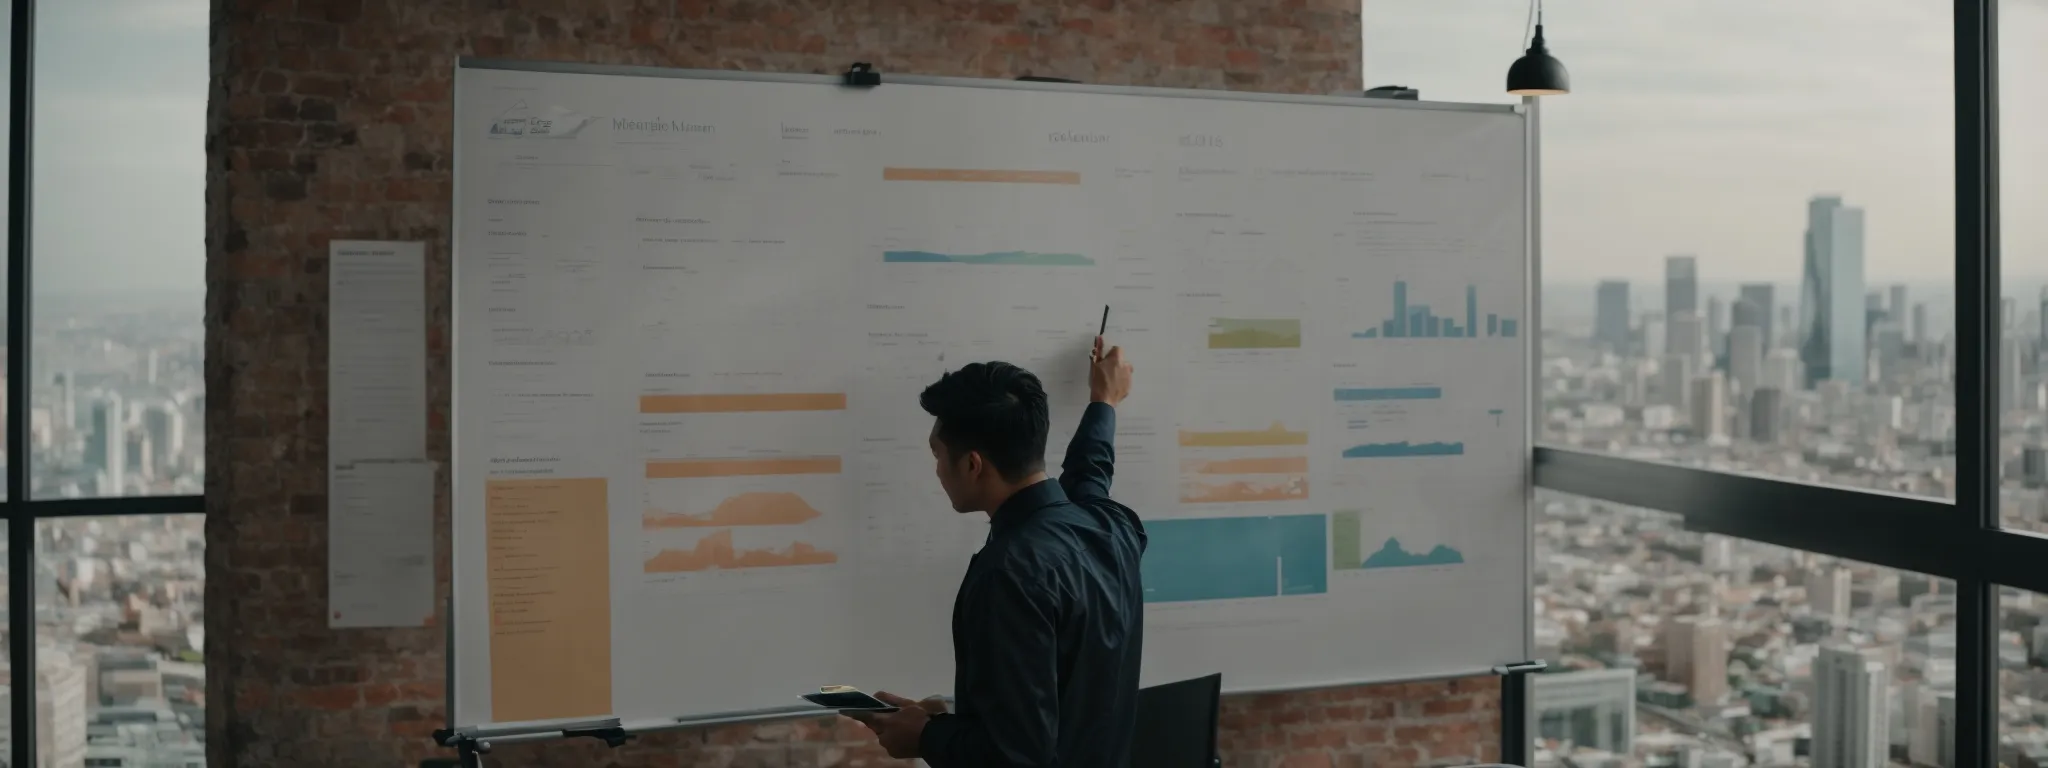 a digital marketer outlines a content plan on a whiteboard overlooking a panoramic city view.